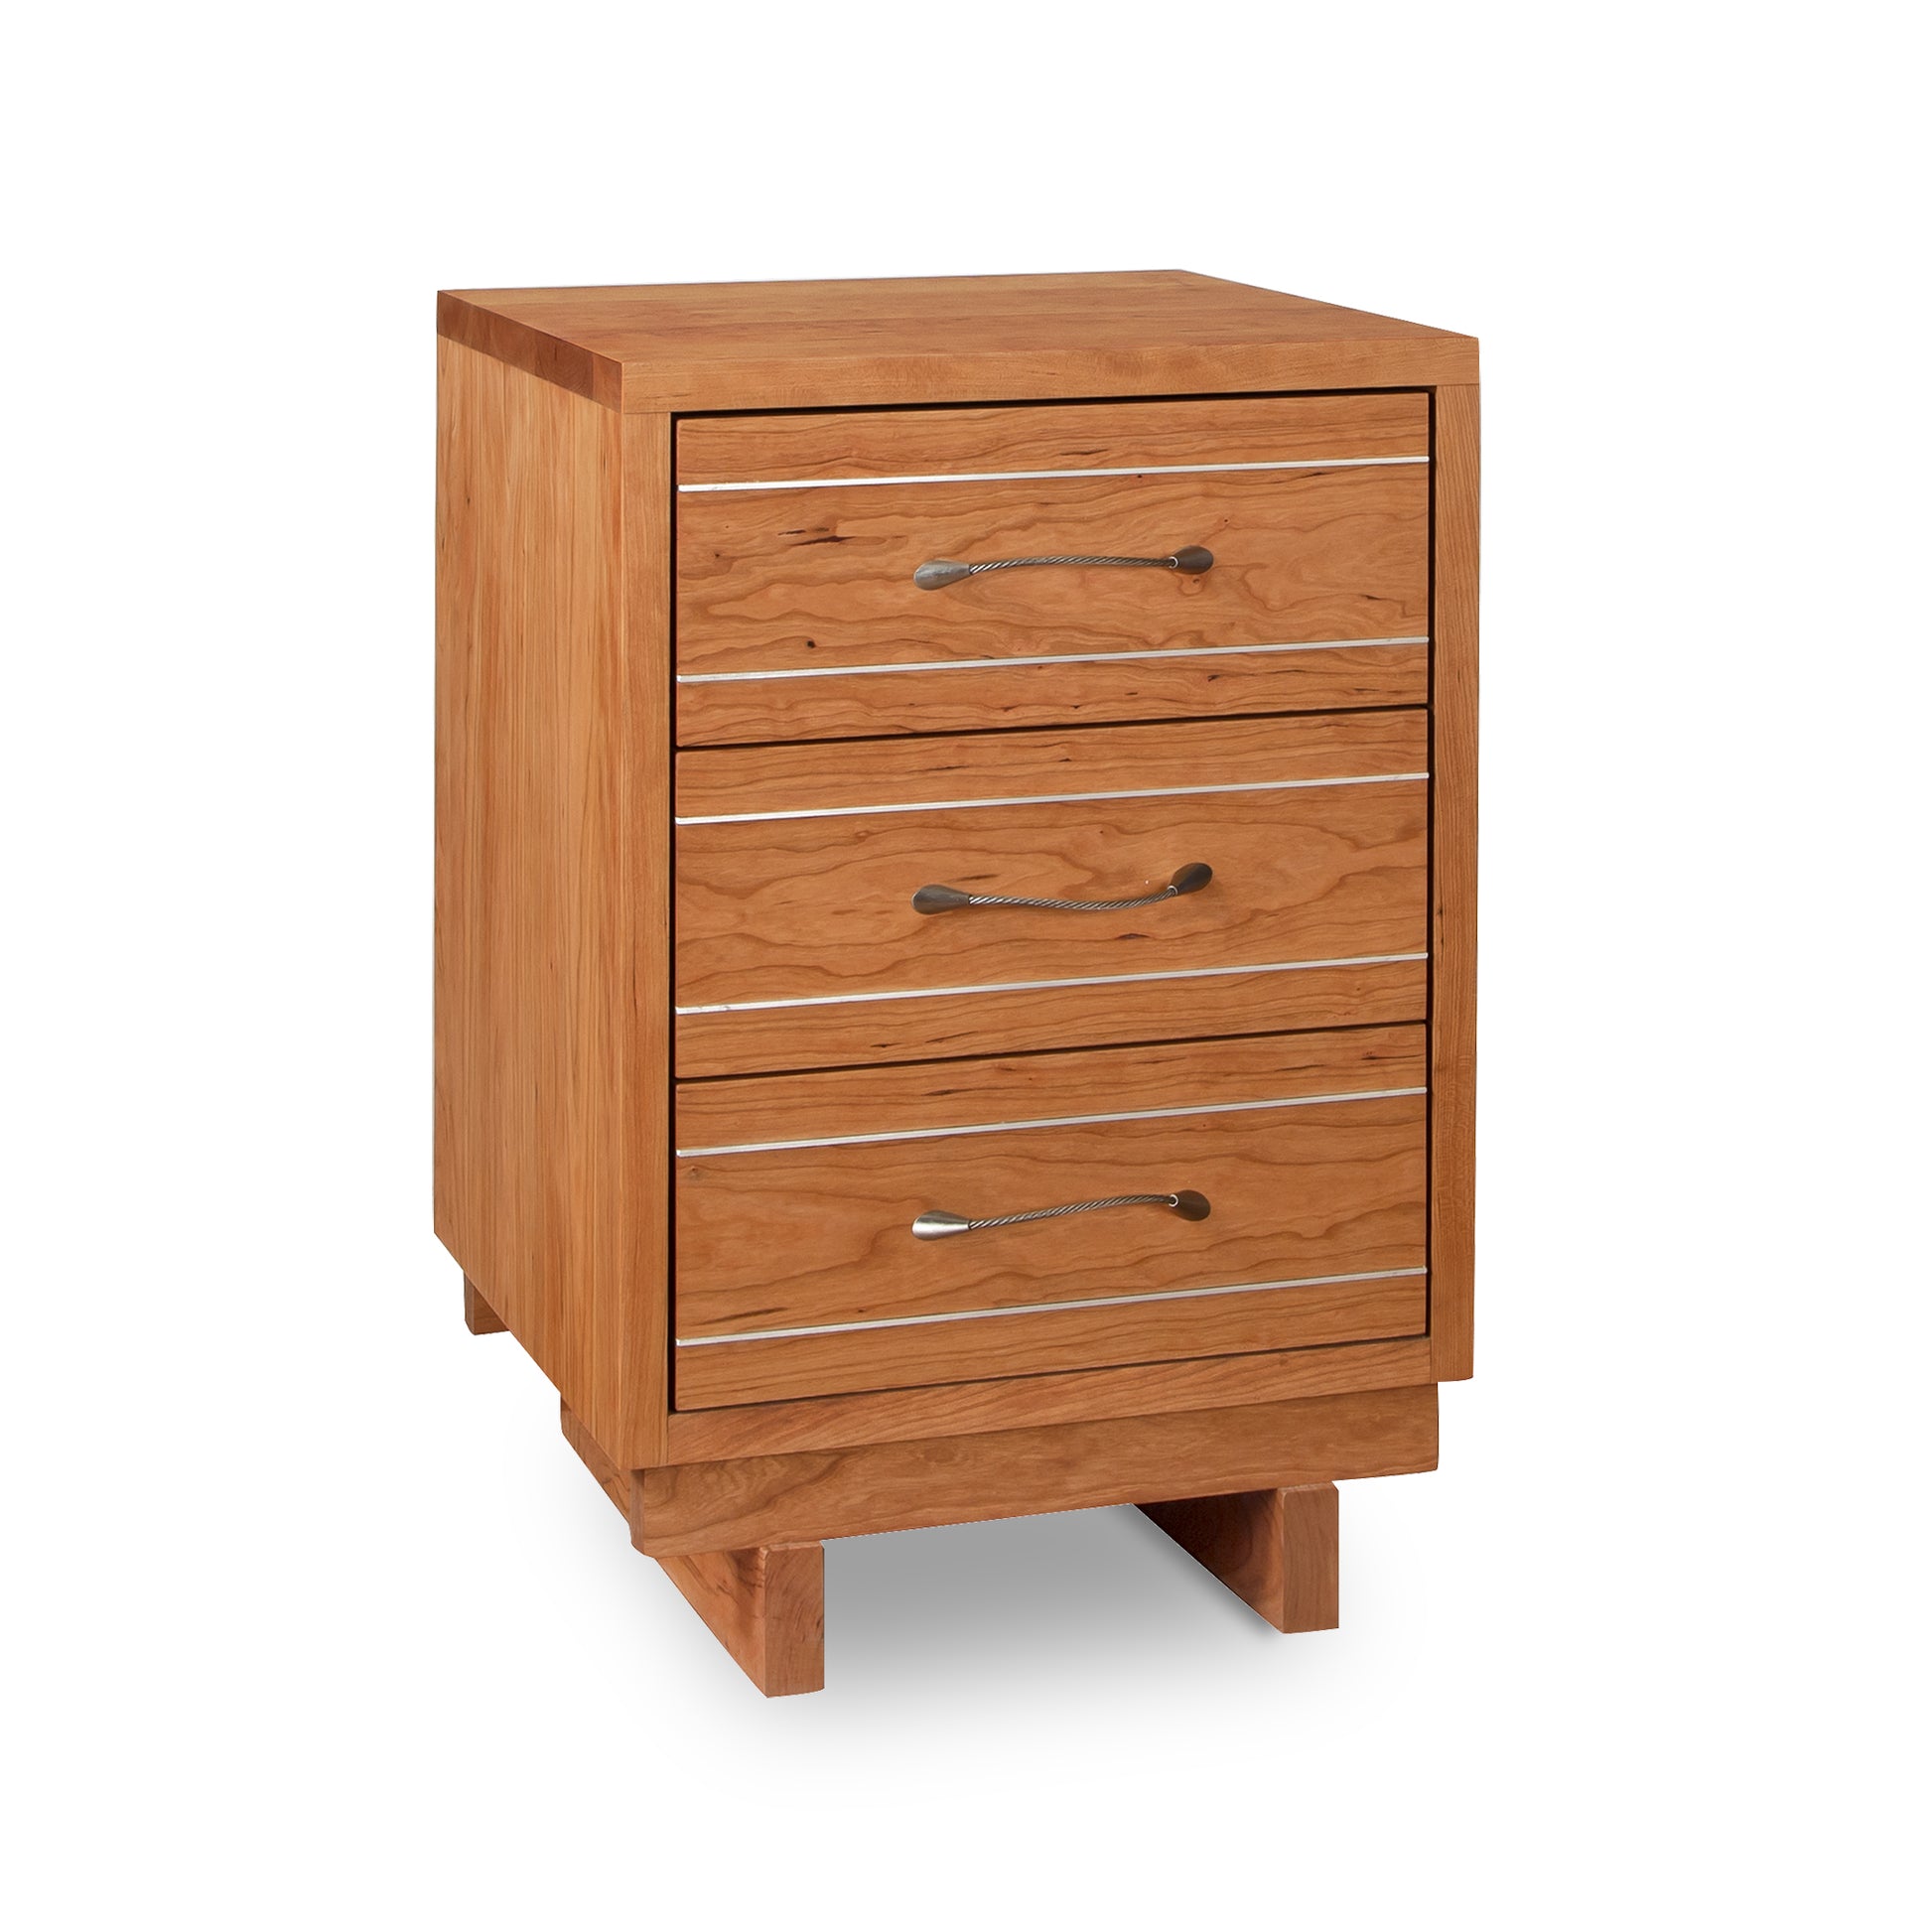 A Vermont Furniture Designs wooden four-drawer filing cabinet with metal handles and dovetail drawers, isolated on a white background.